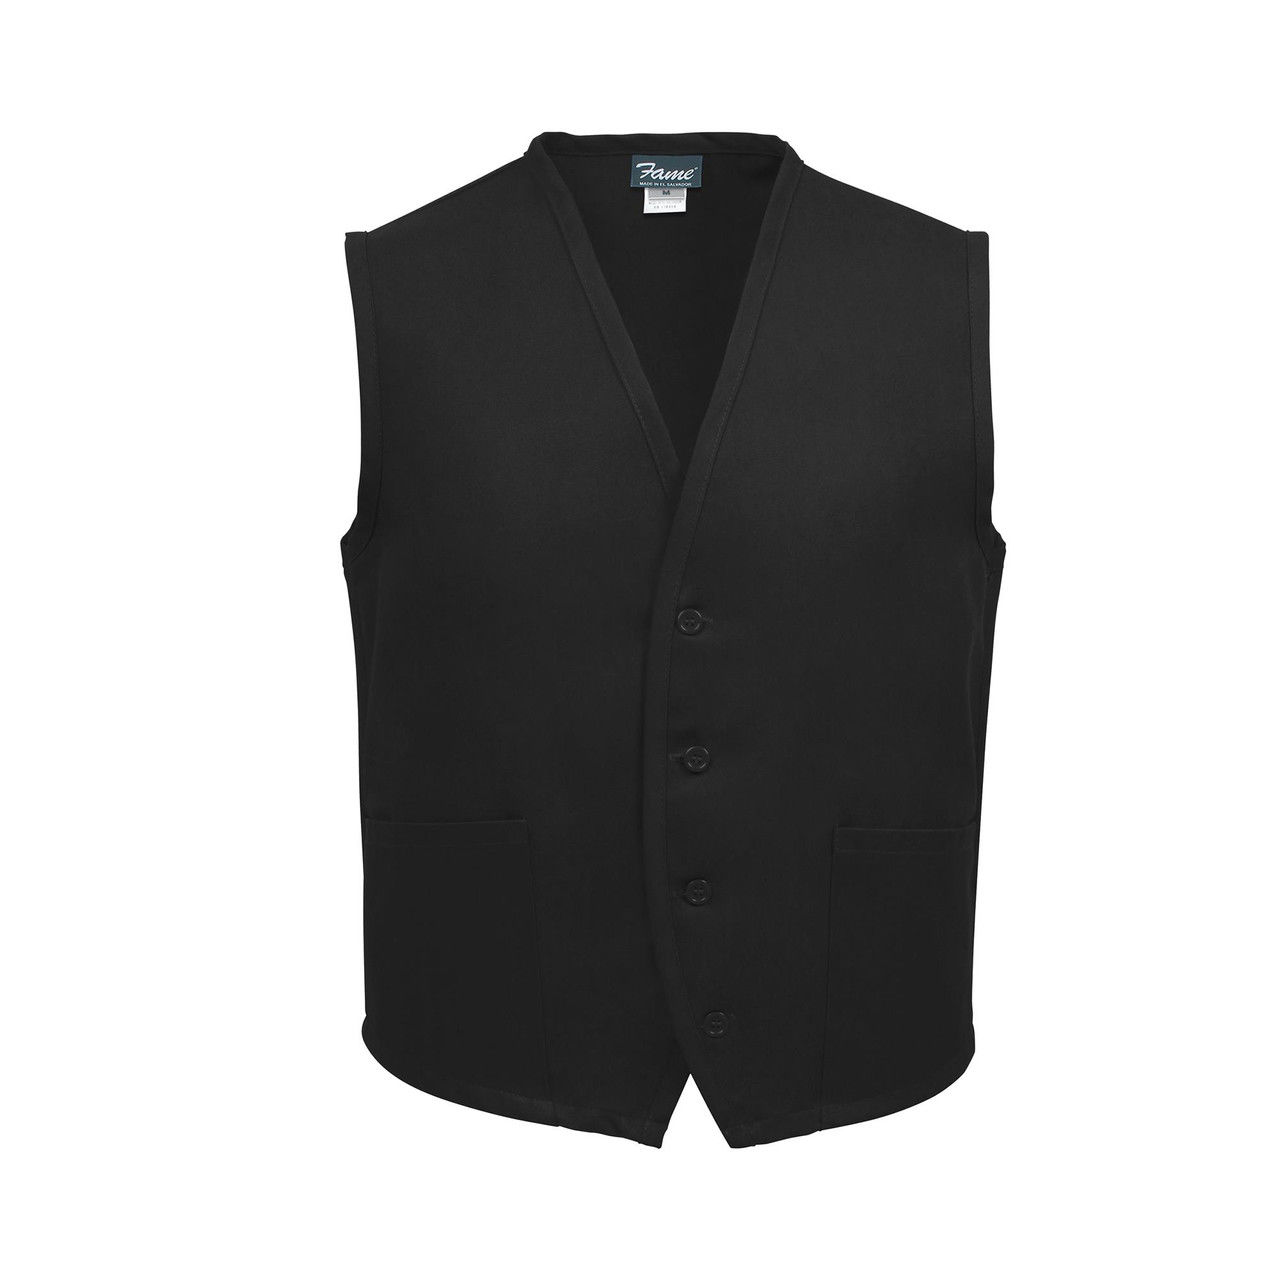 Does the unisex vest have a professional finish?